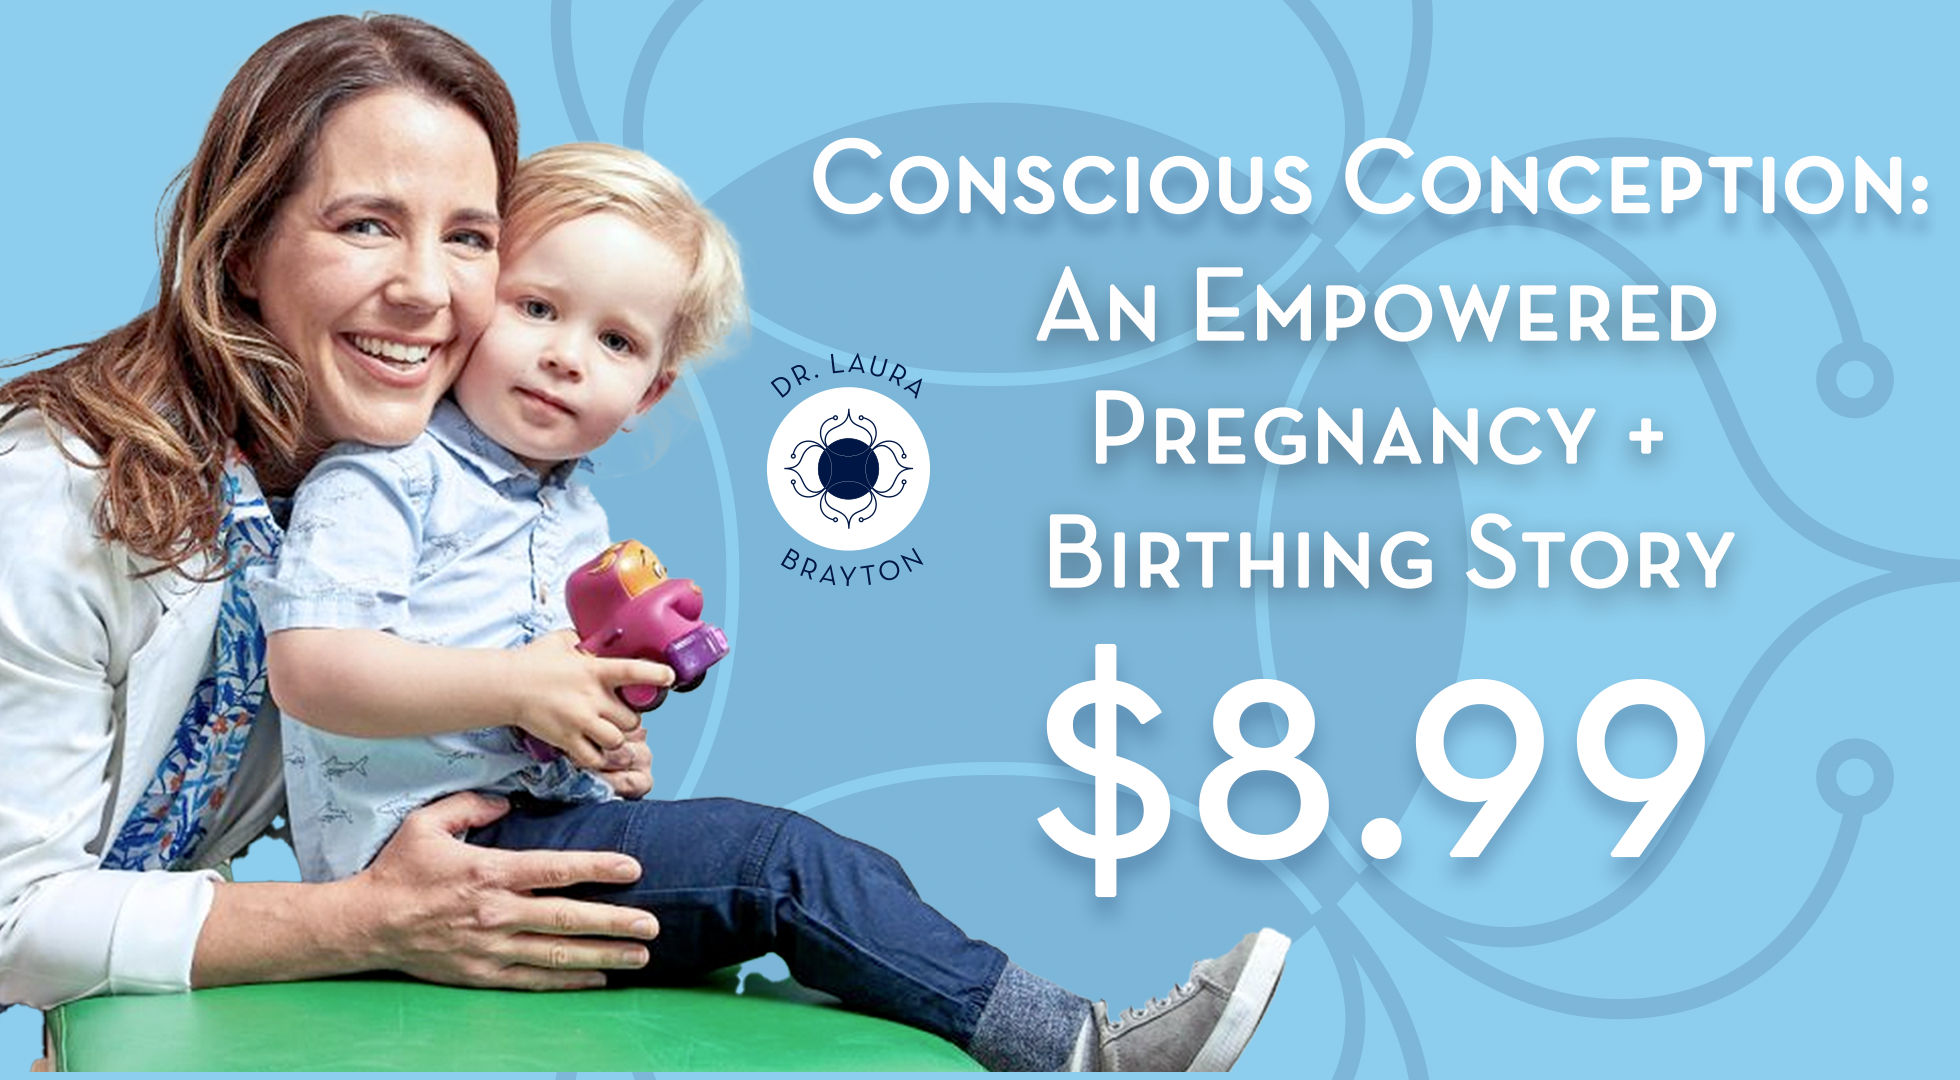 Conscious Conception: An Empowered Pregnancy + Birthing Story